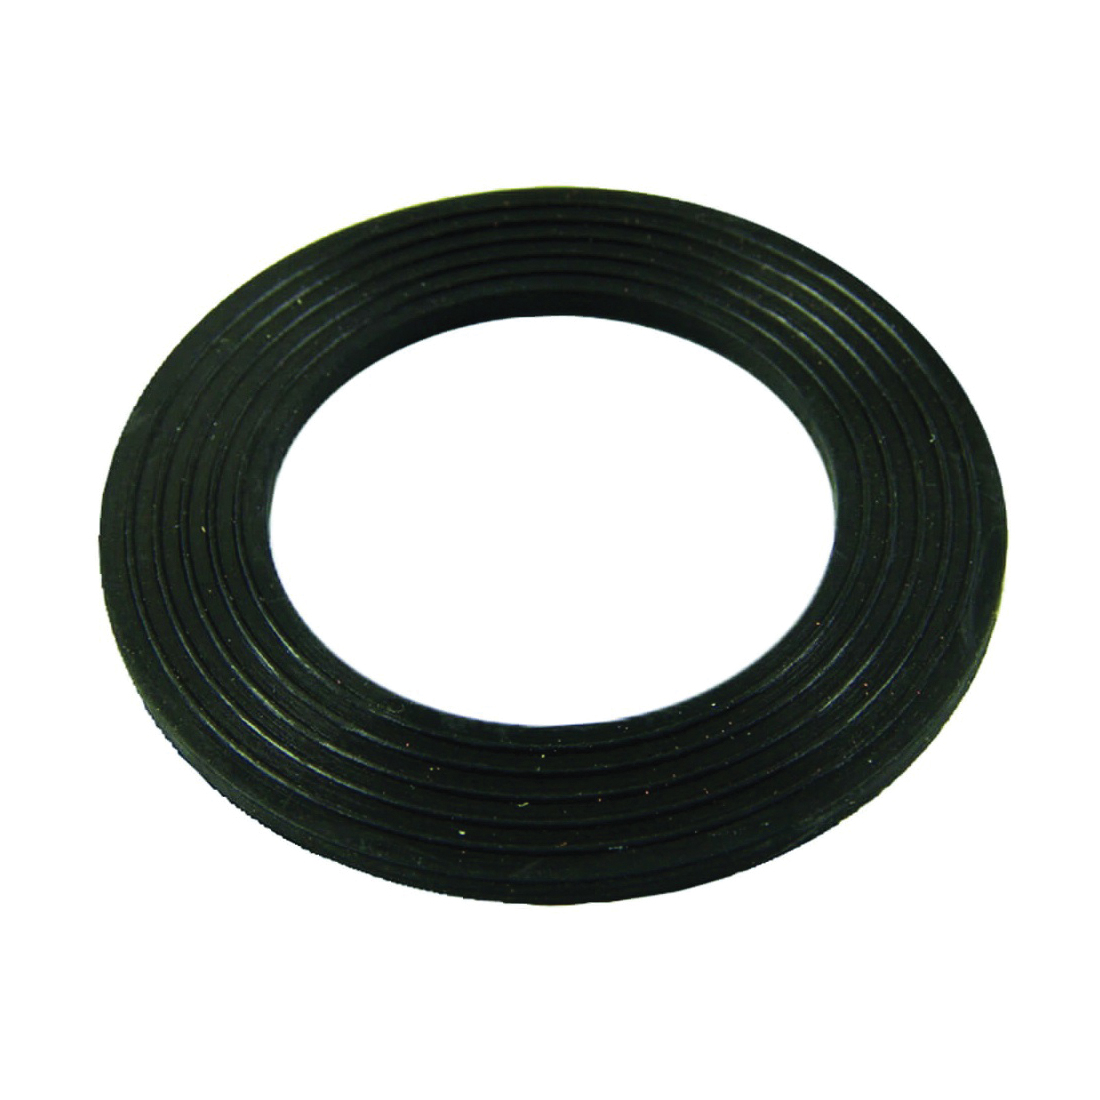 88348 Bath Shoe Gasket, 1-11/16 in ID x 2-5/8 in OD Dia, 3/32 in Thick, Rubber, For: Tub Drain and Drain Plug